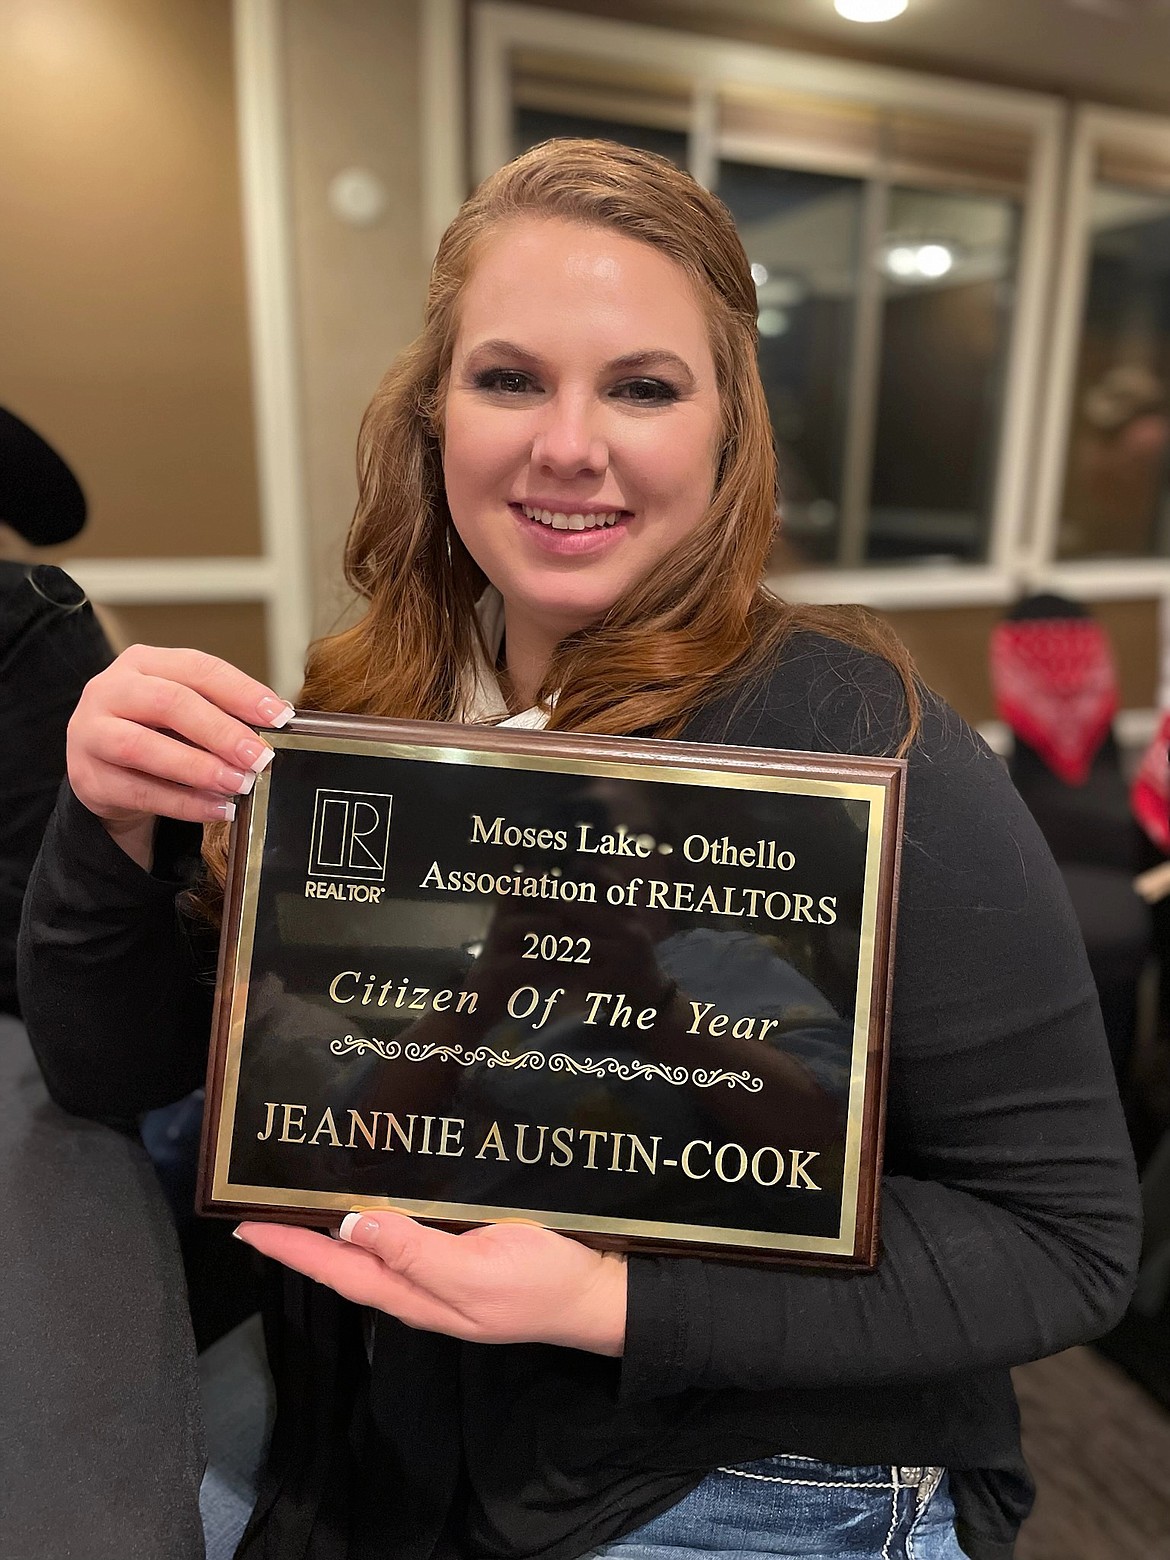 Jeannie Austin-Cook stops for a photo with her plaque recognizing her for her work in the community. She was nominated for the award by Allison May of Better Homes and Gardens Gary Mann Real Estate in Moses Lake.